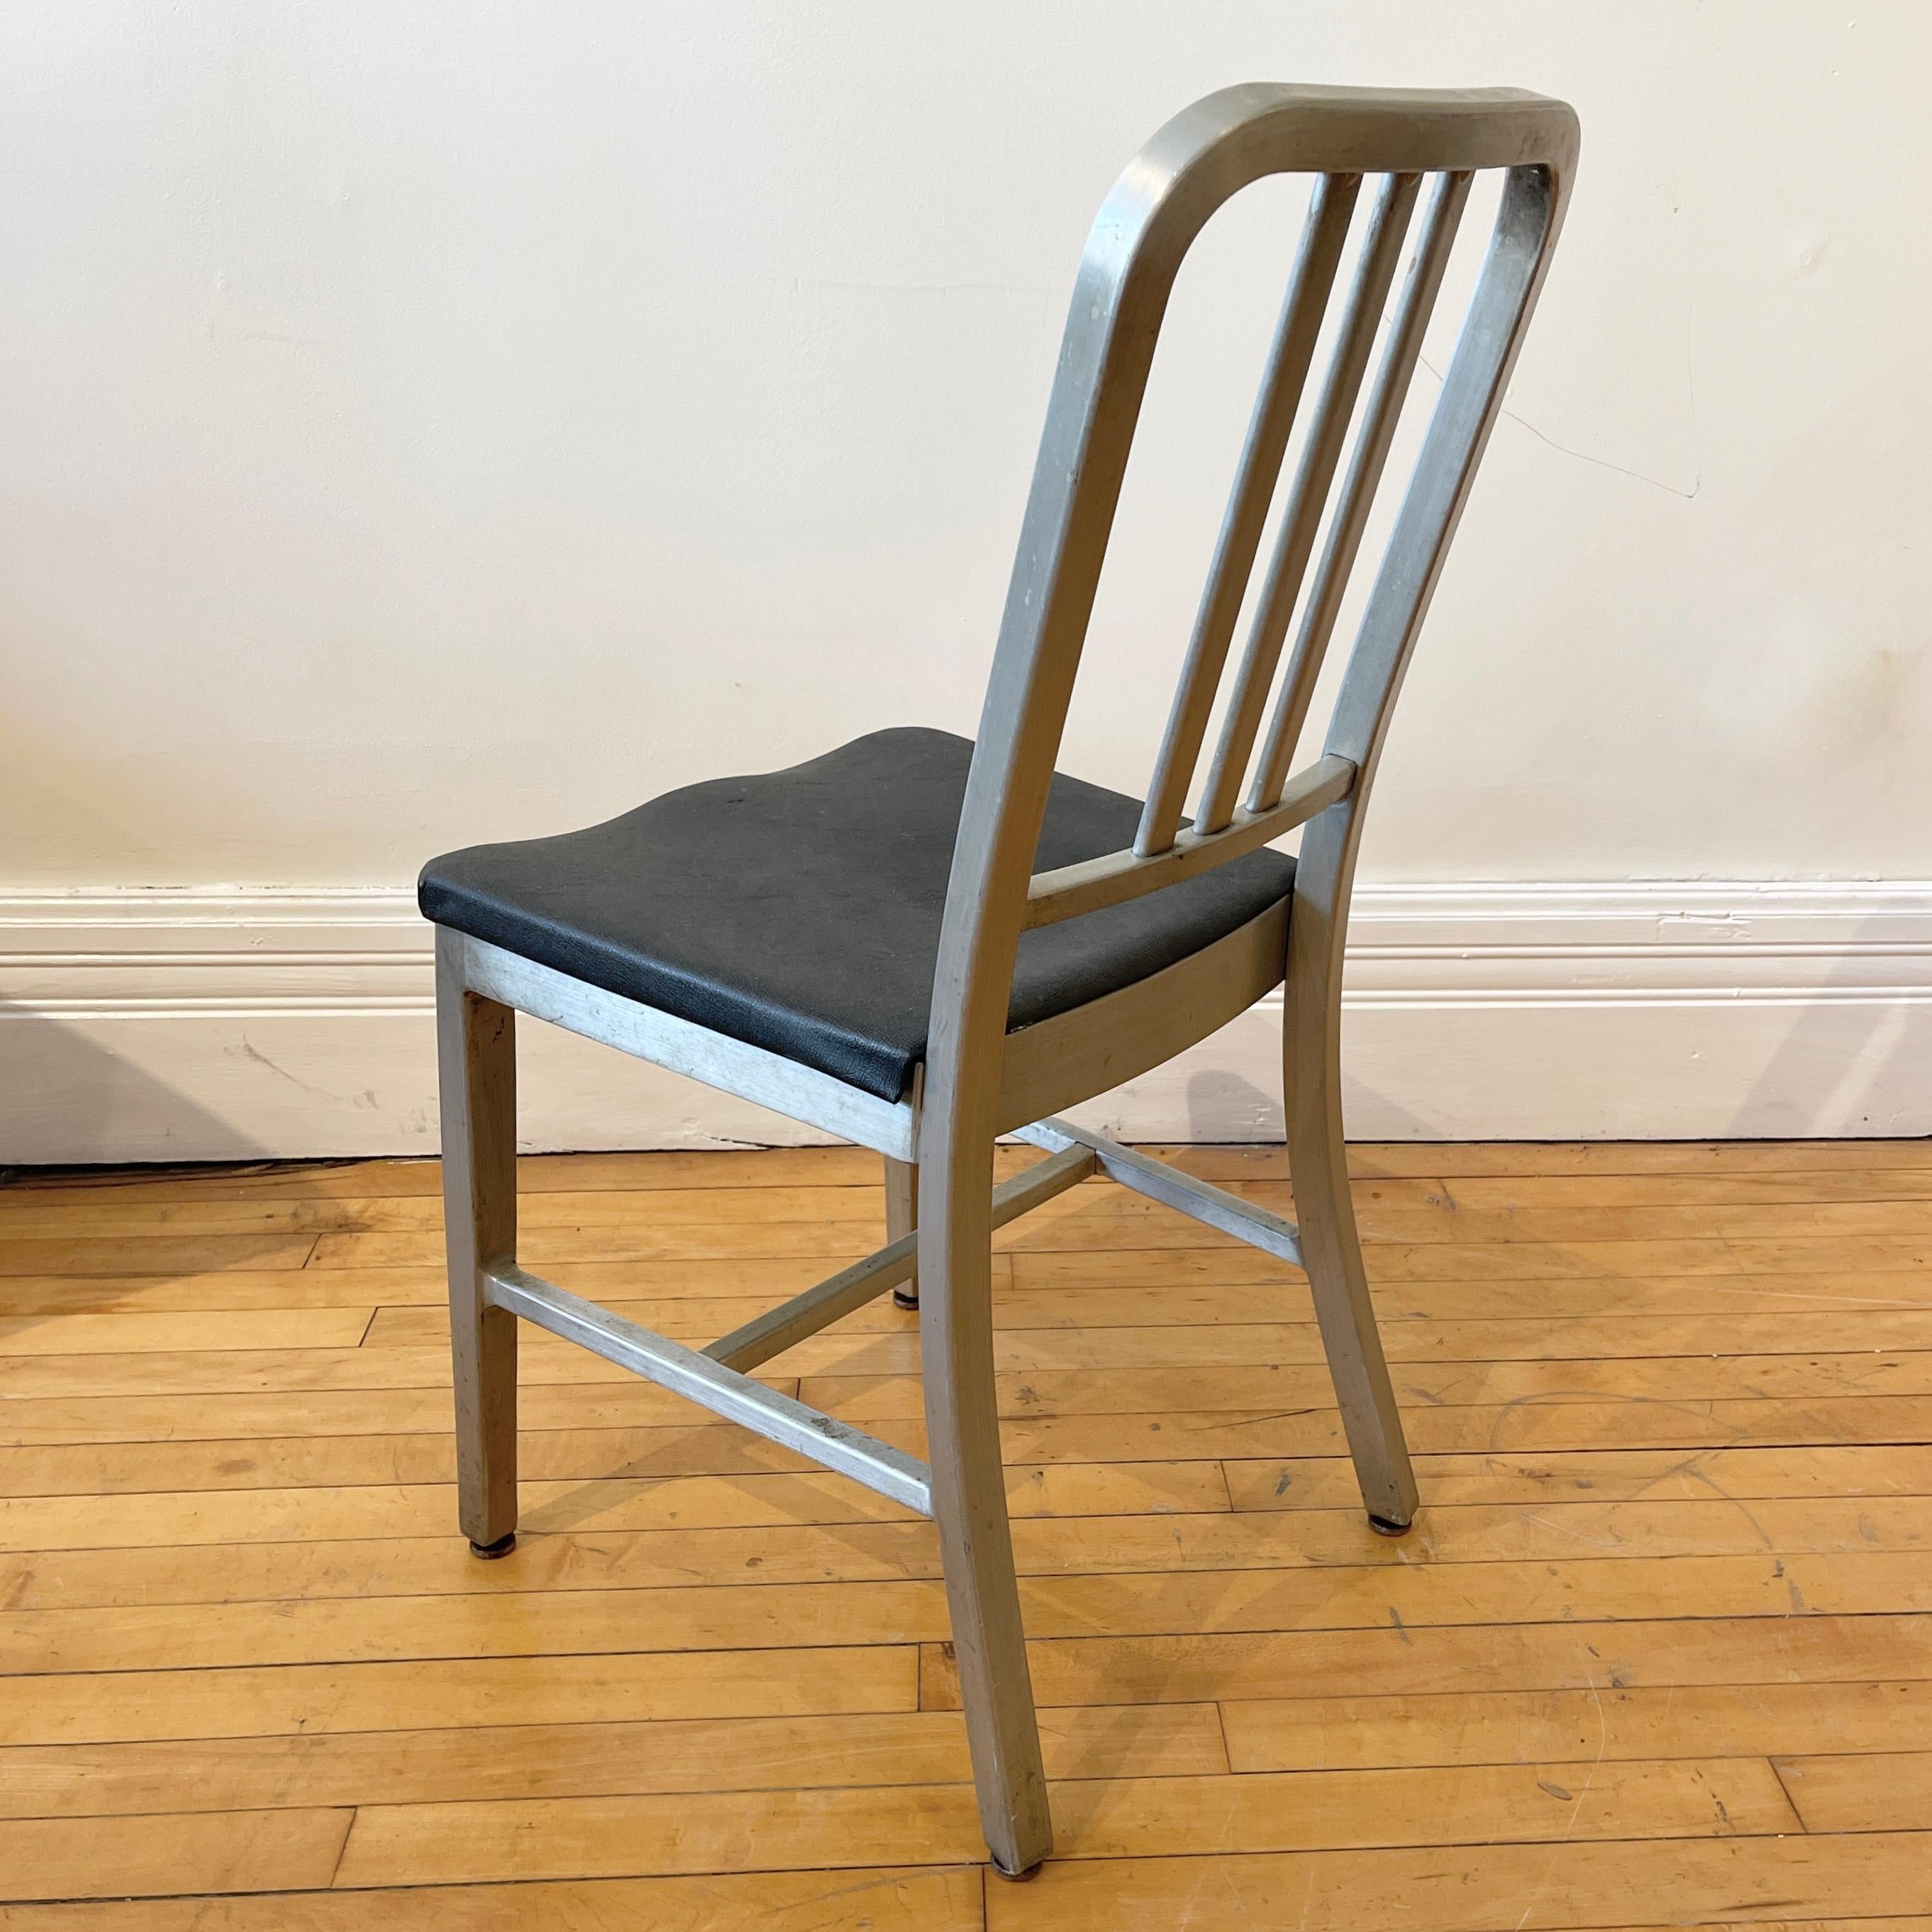 Welded Early Original Navy Chairs by Goodform / General Fireproofing 60 Available